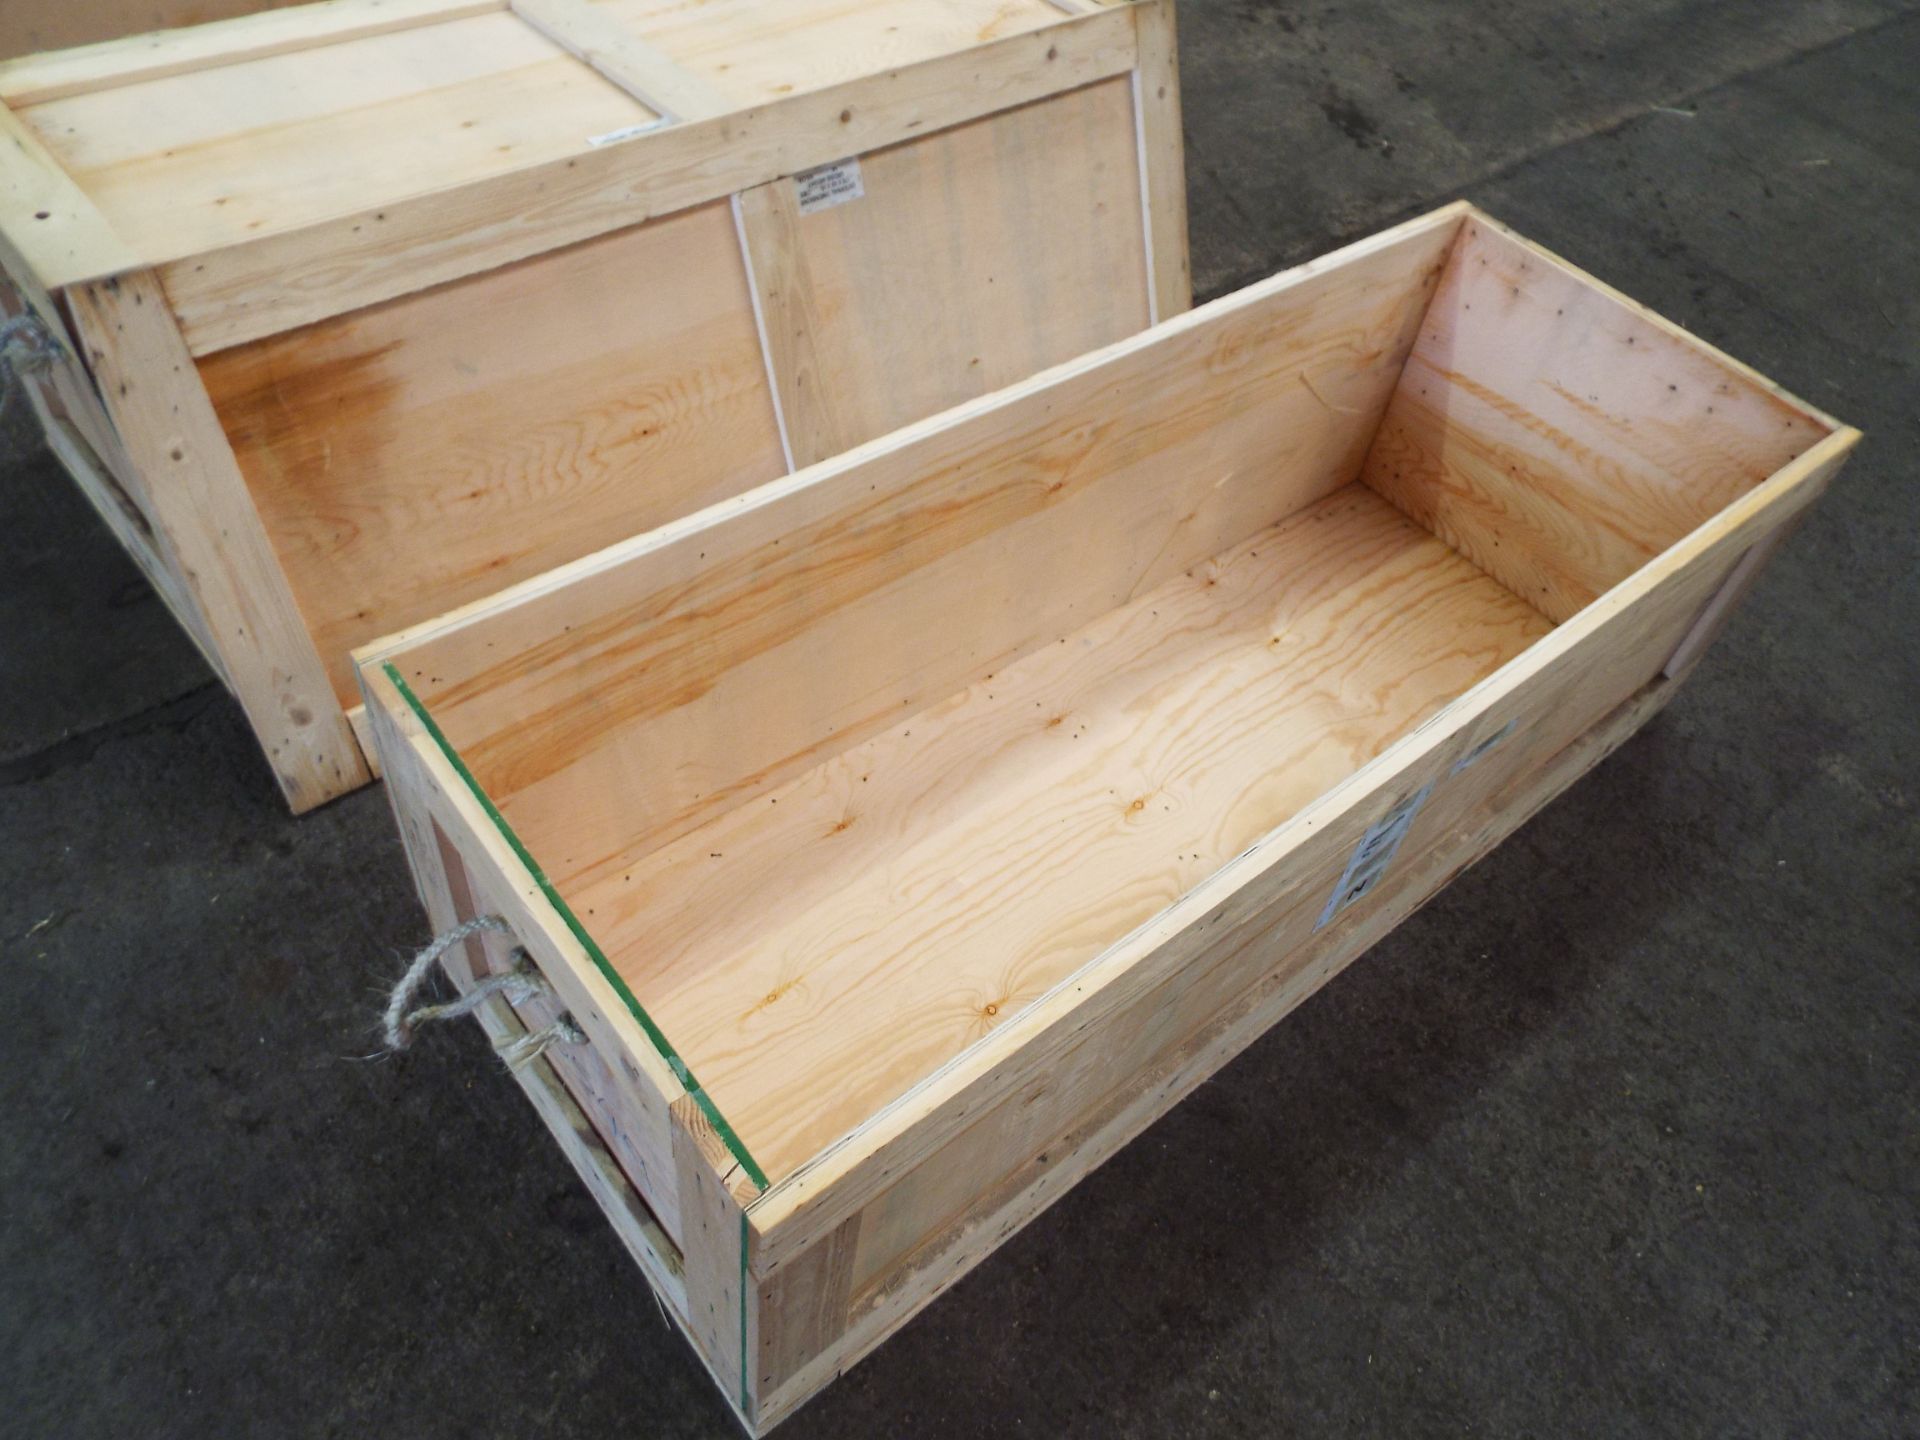 6 x Heavy Duty Packing/Shipping Crates - Image 4 of 6